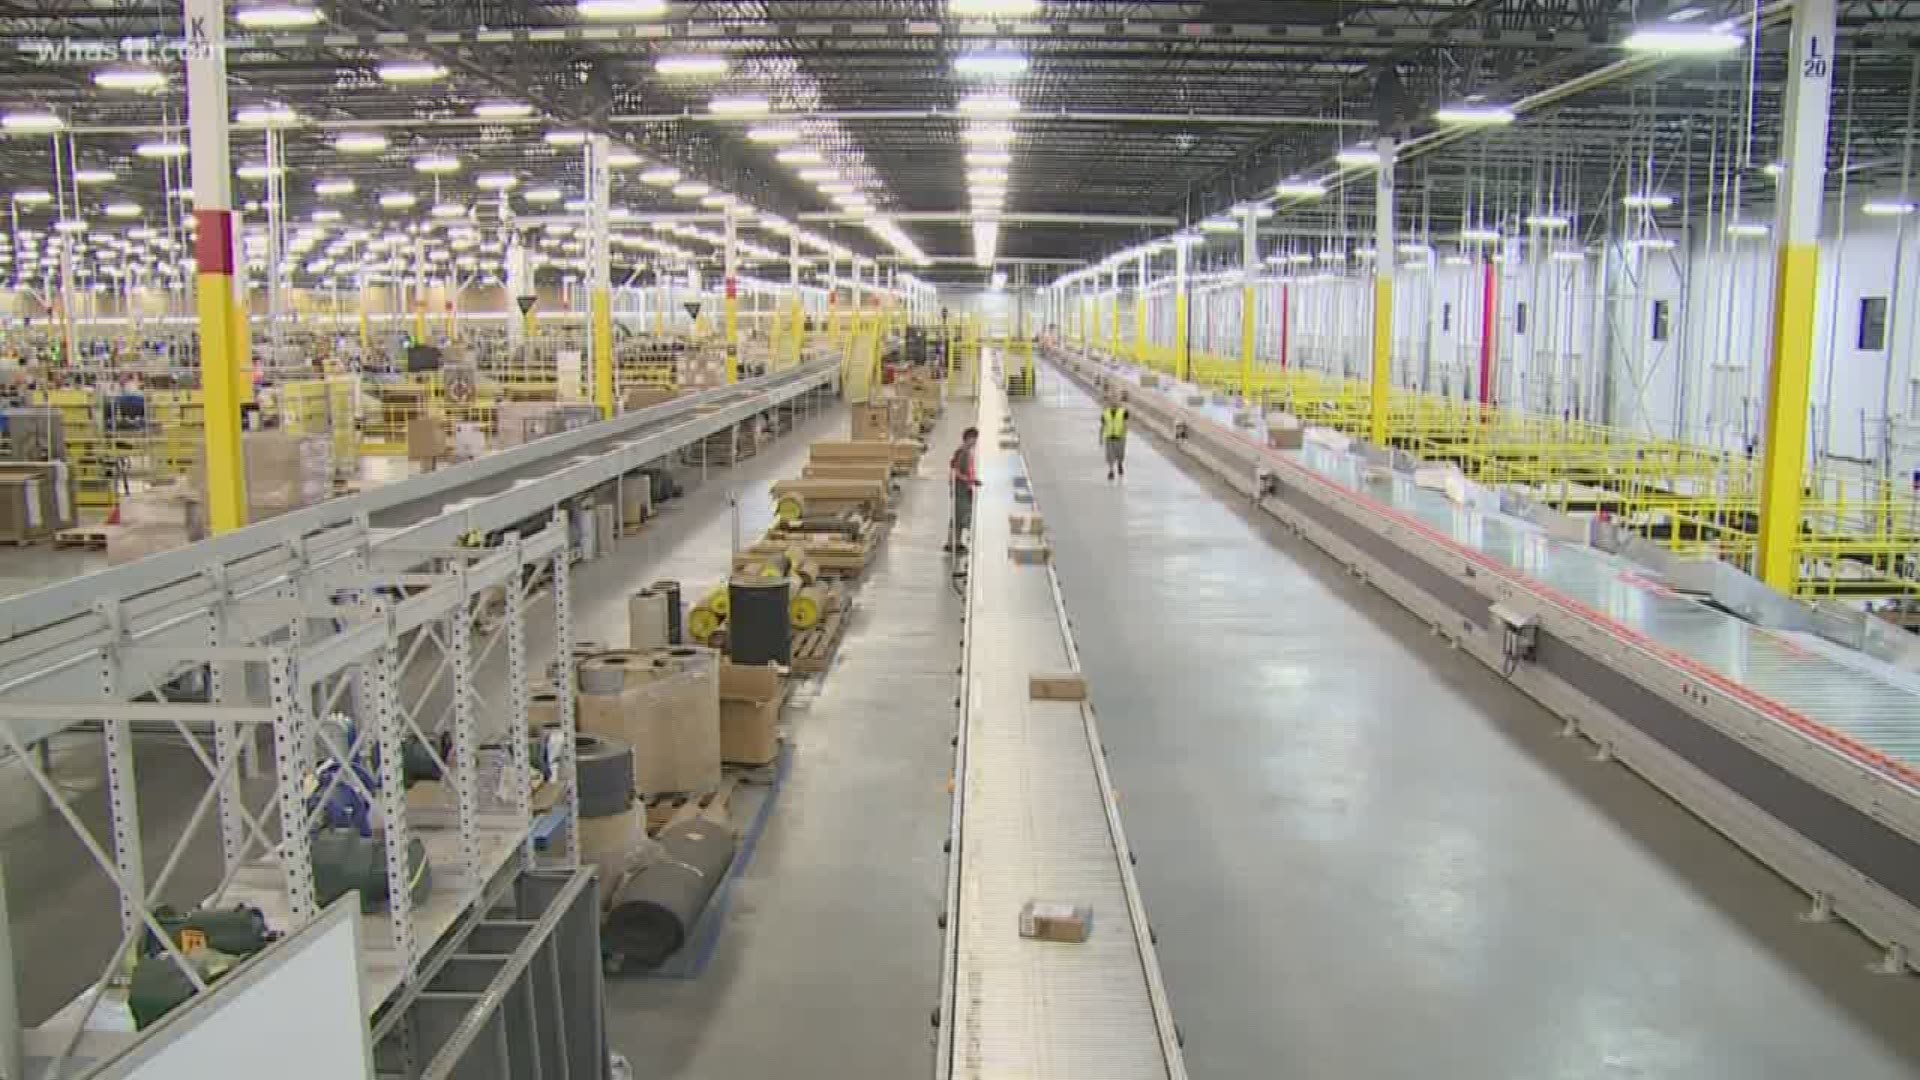 The operations facility will receive and ship products to other Amazon fulfillment centers.